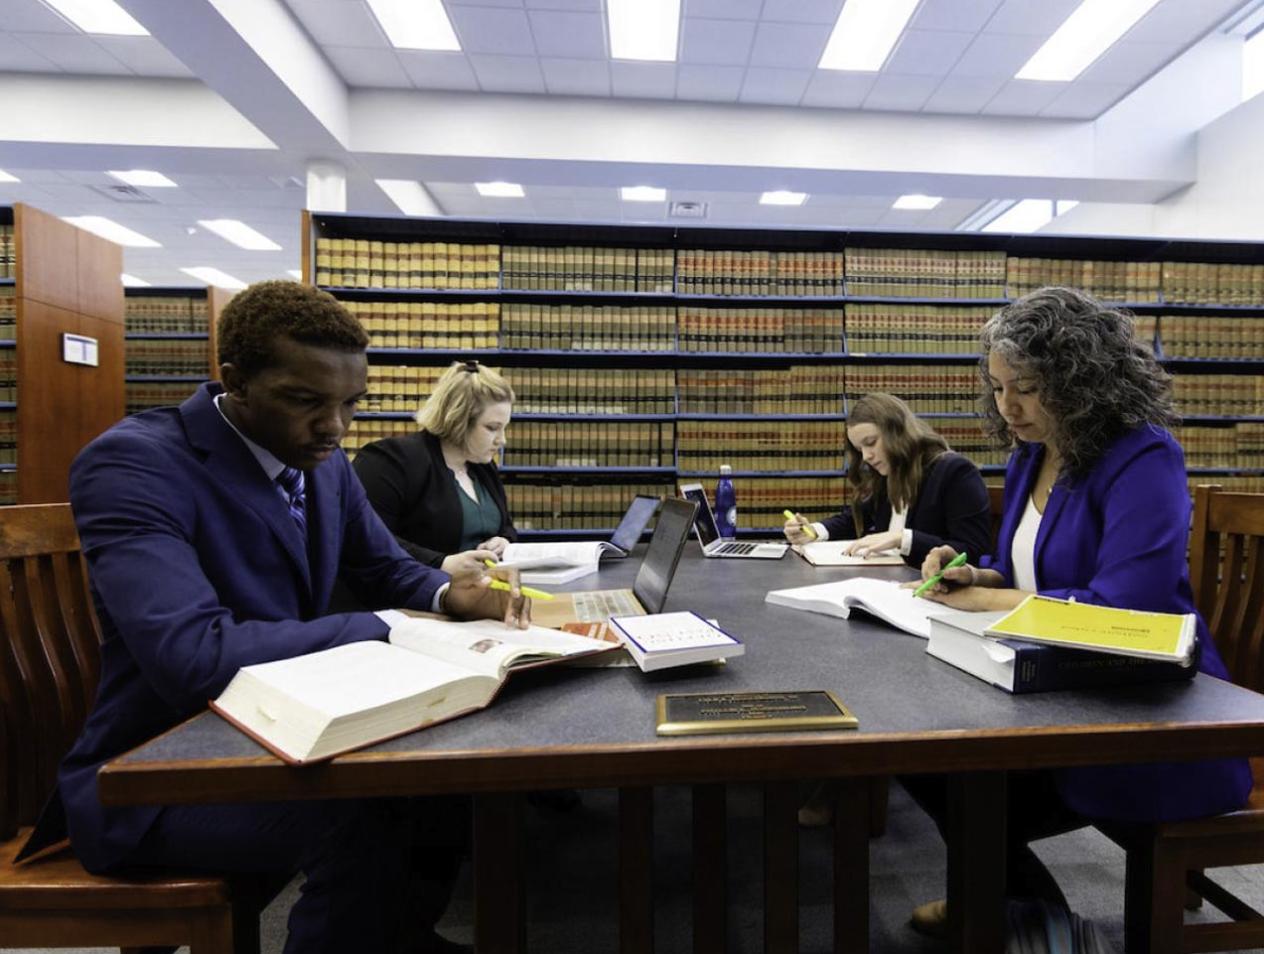 Four students at table and studying in Law Library